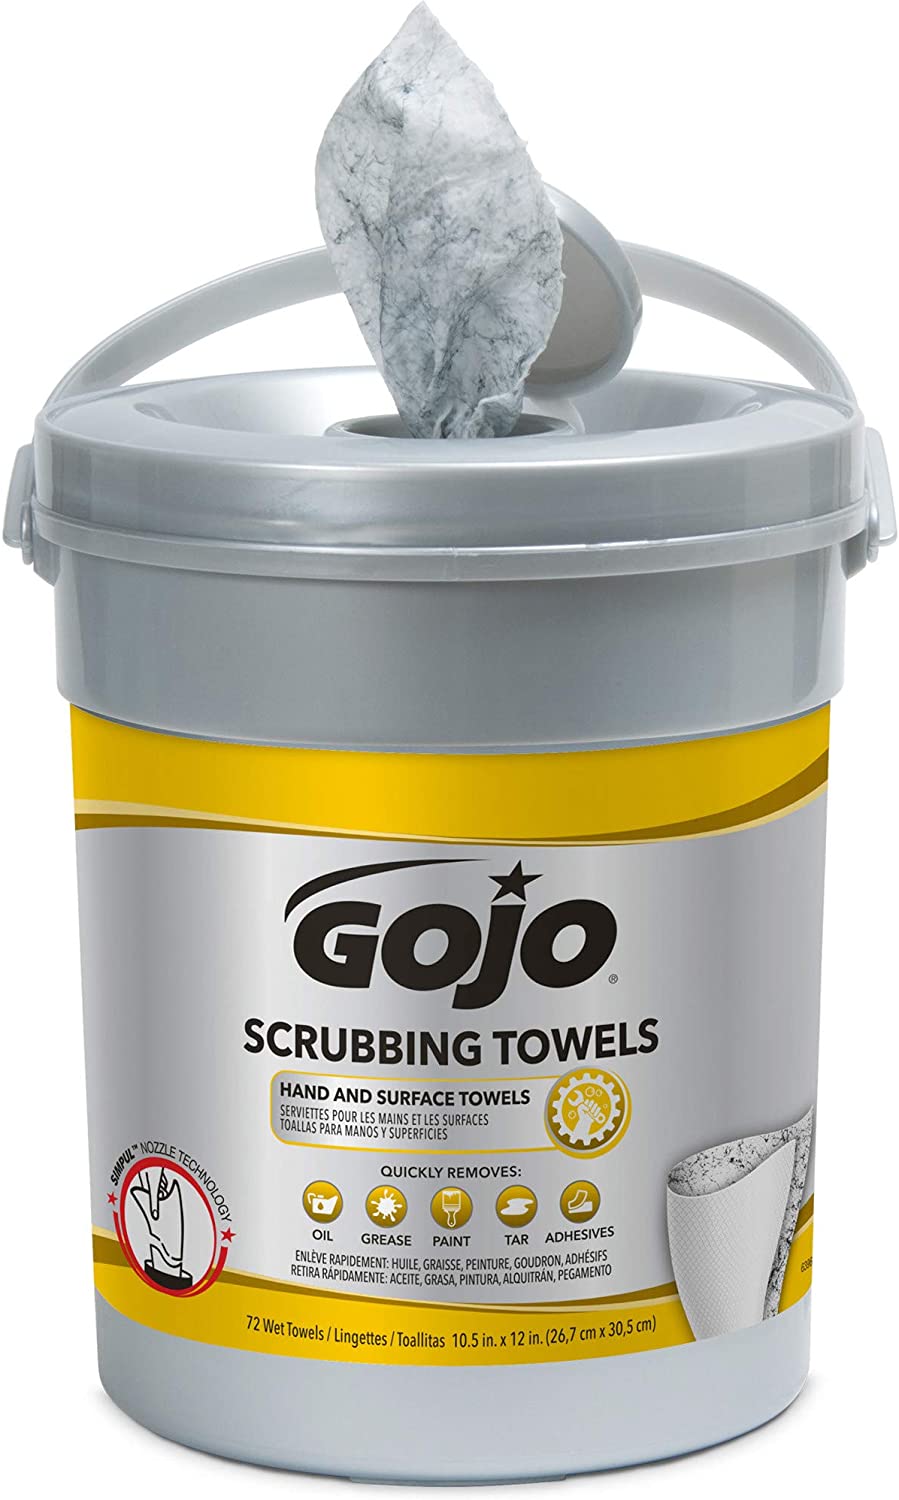 GOJO Scrubbing Towels - 72 ct - Highway 61 Appliance Parts